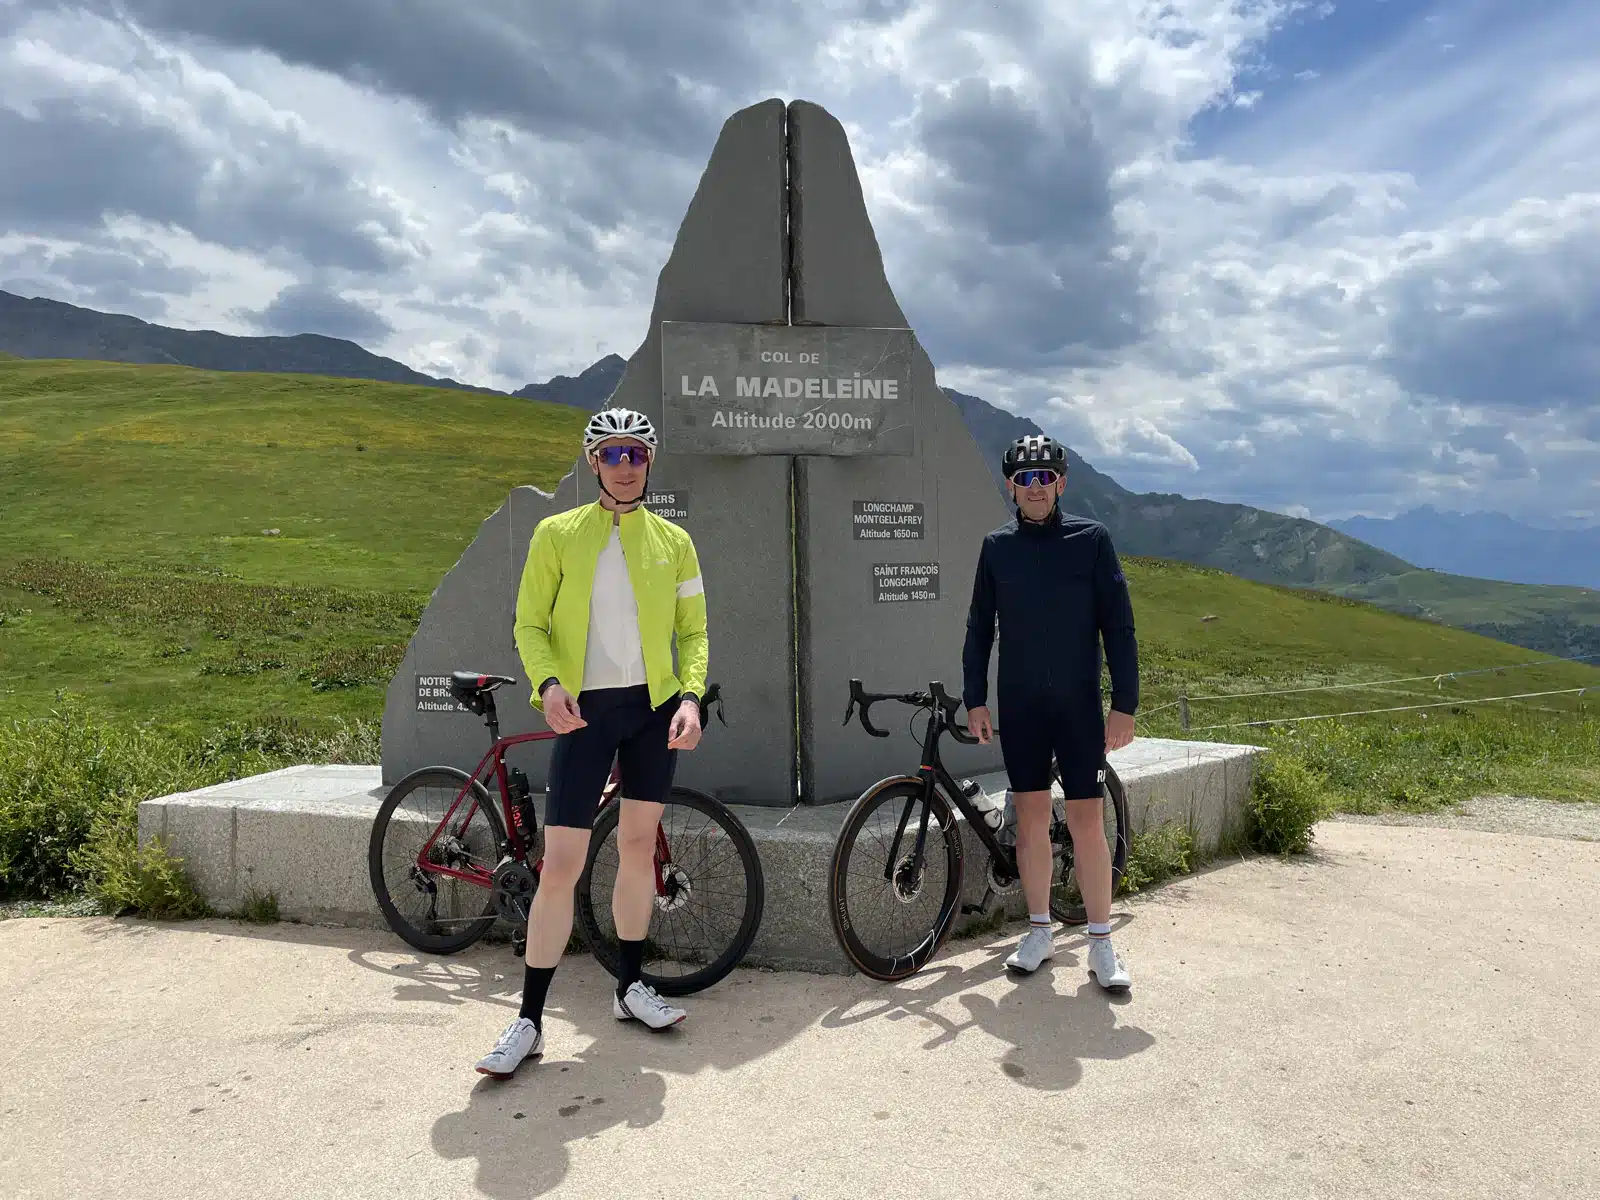 Two cyclists standing by a monument at col de la madeleine, at an altitude of 2000m, with scenic mountain views in the background.